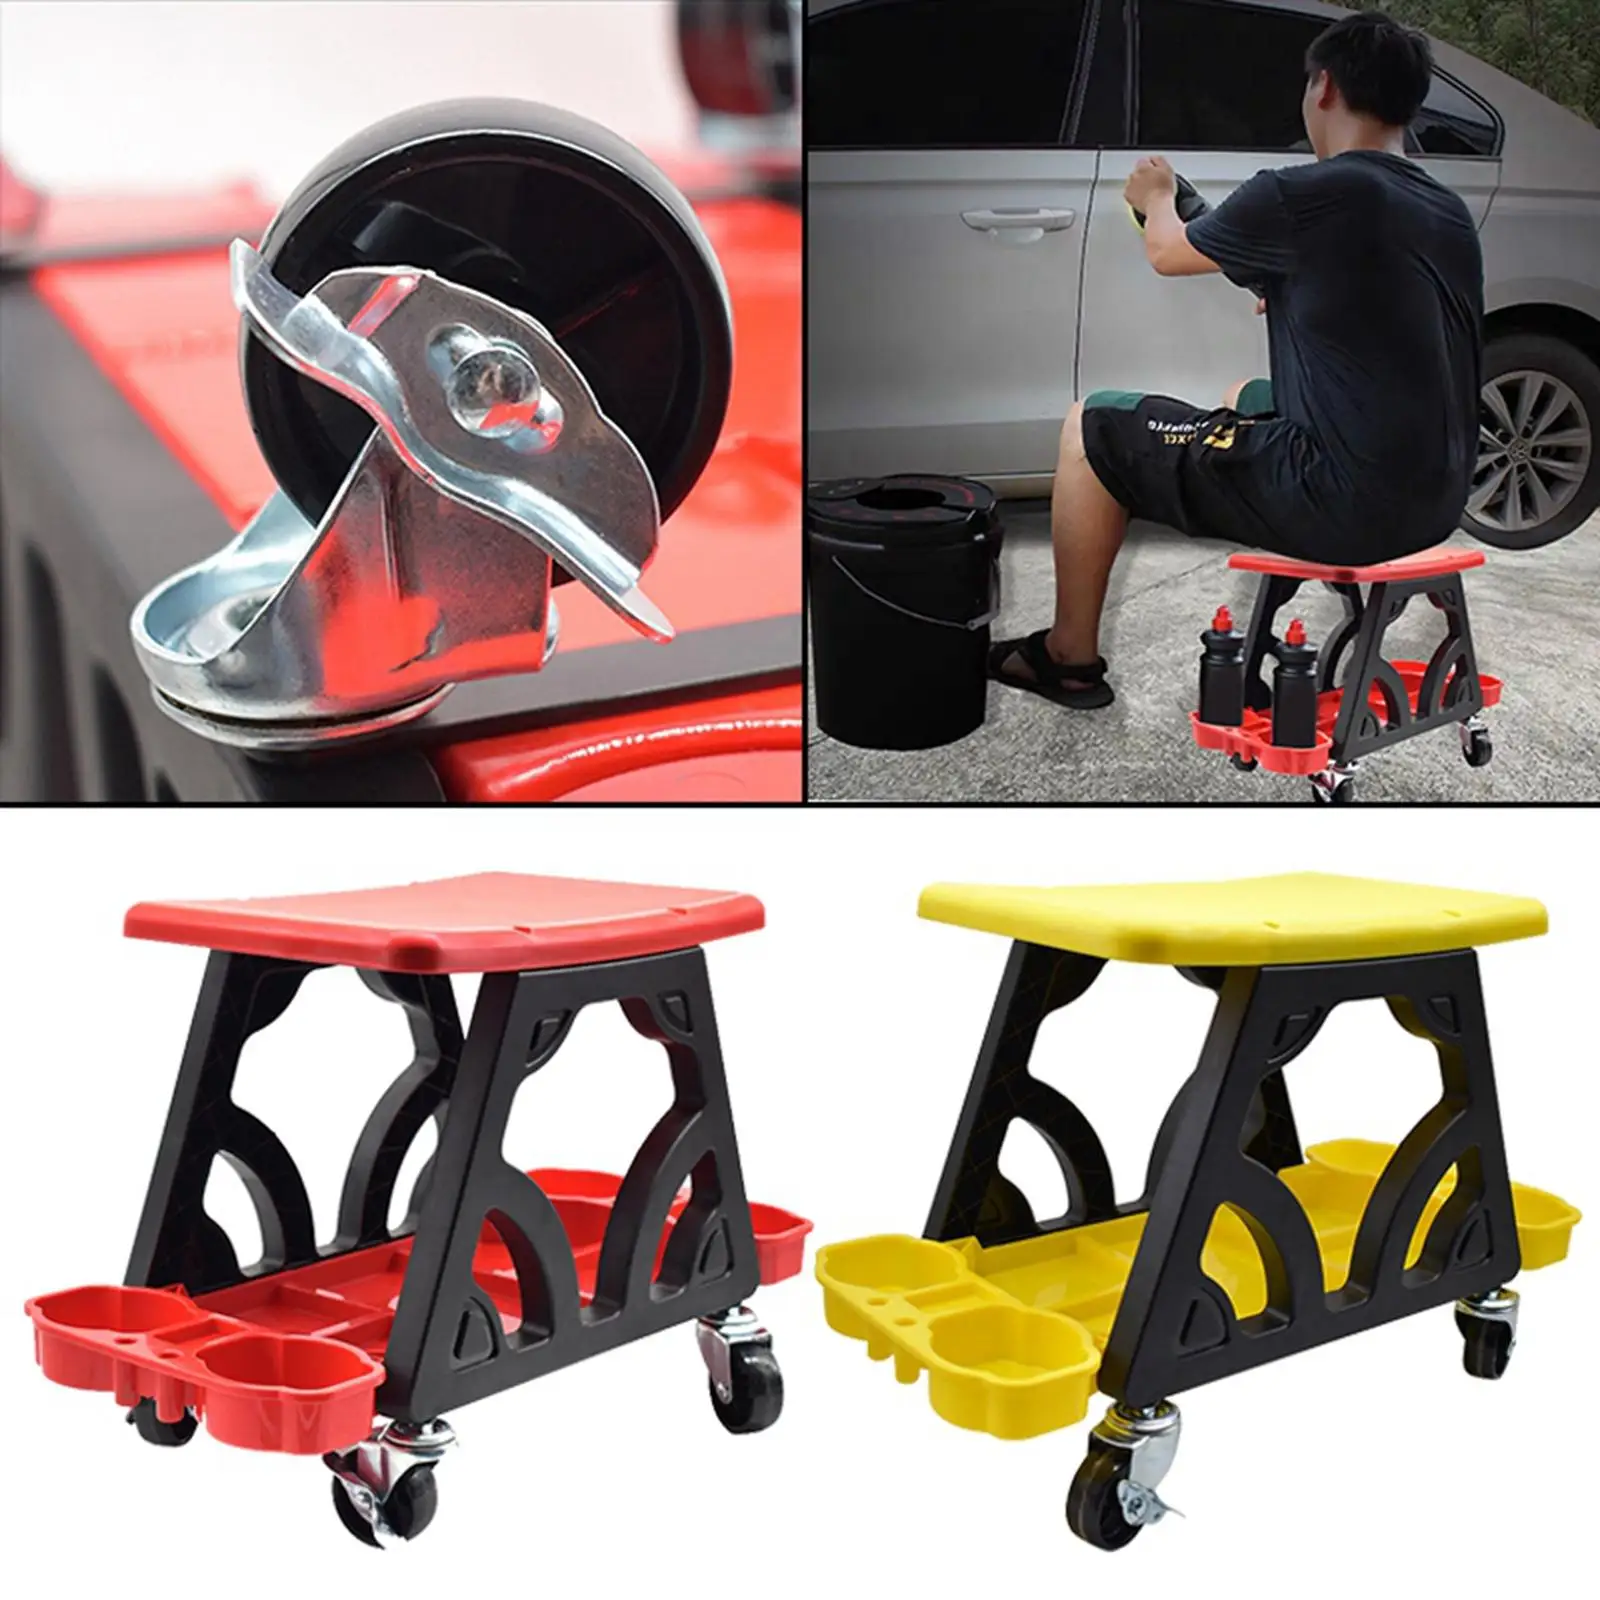 Car Detailing Stool Chair Wheels Roller Creeper Seat with Storage Holder for Wax Polishing Projects